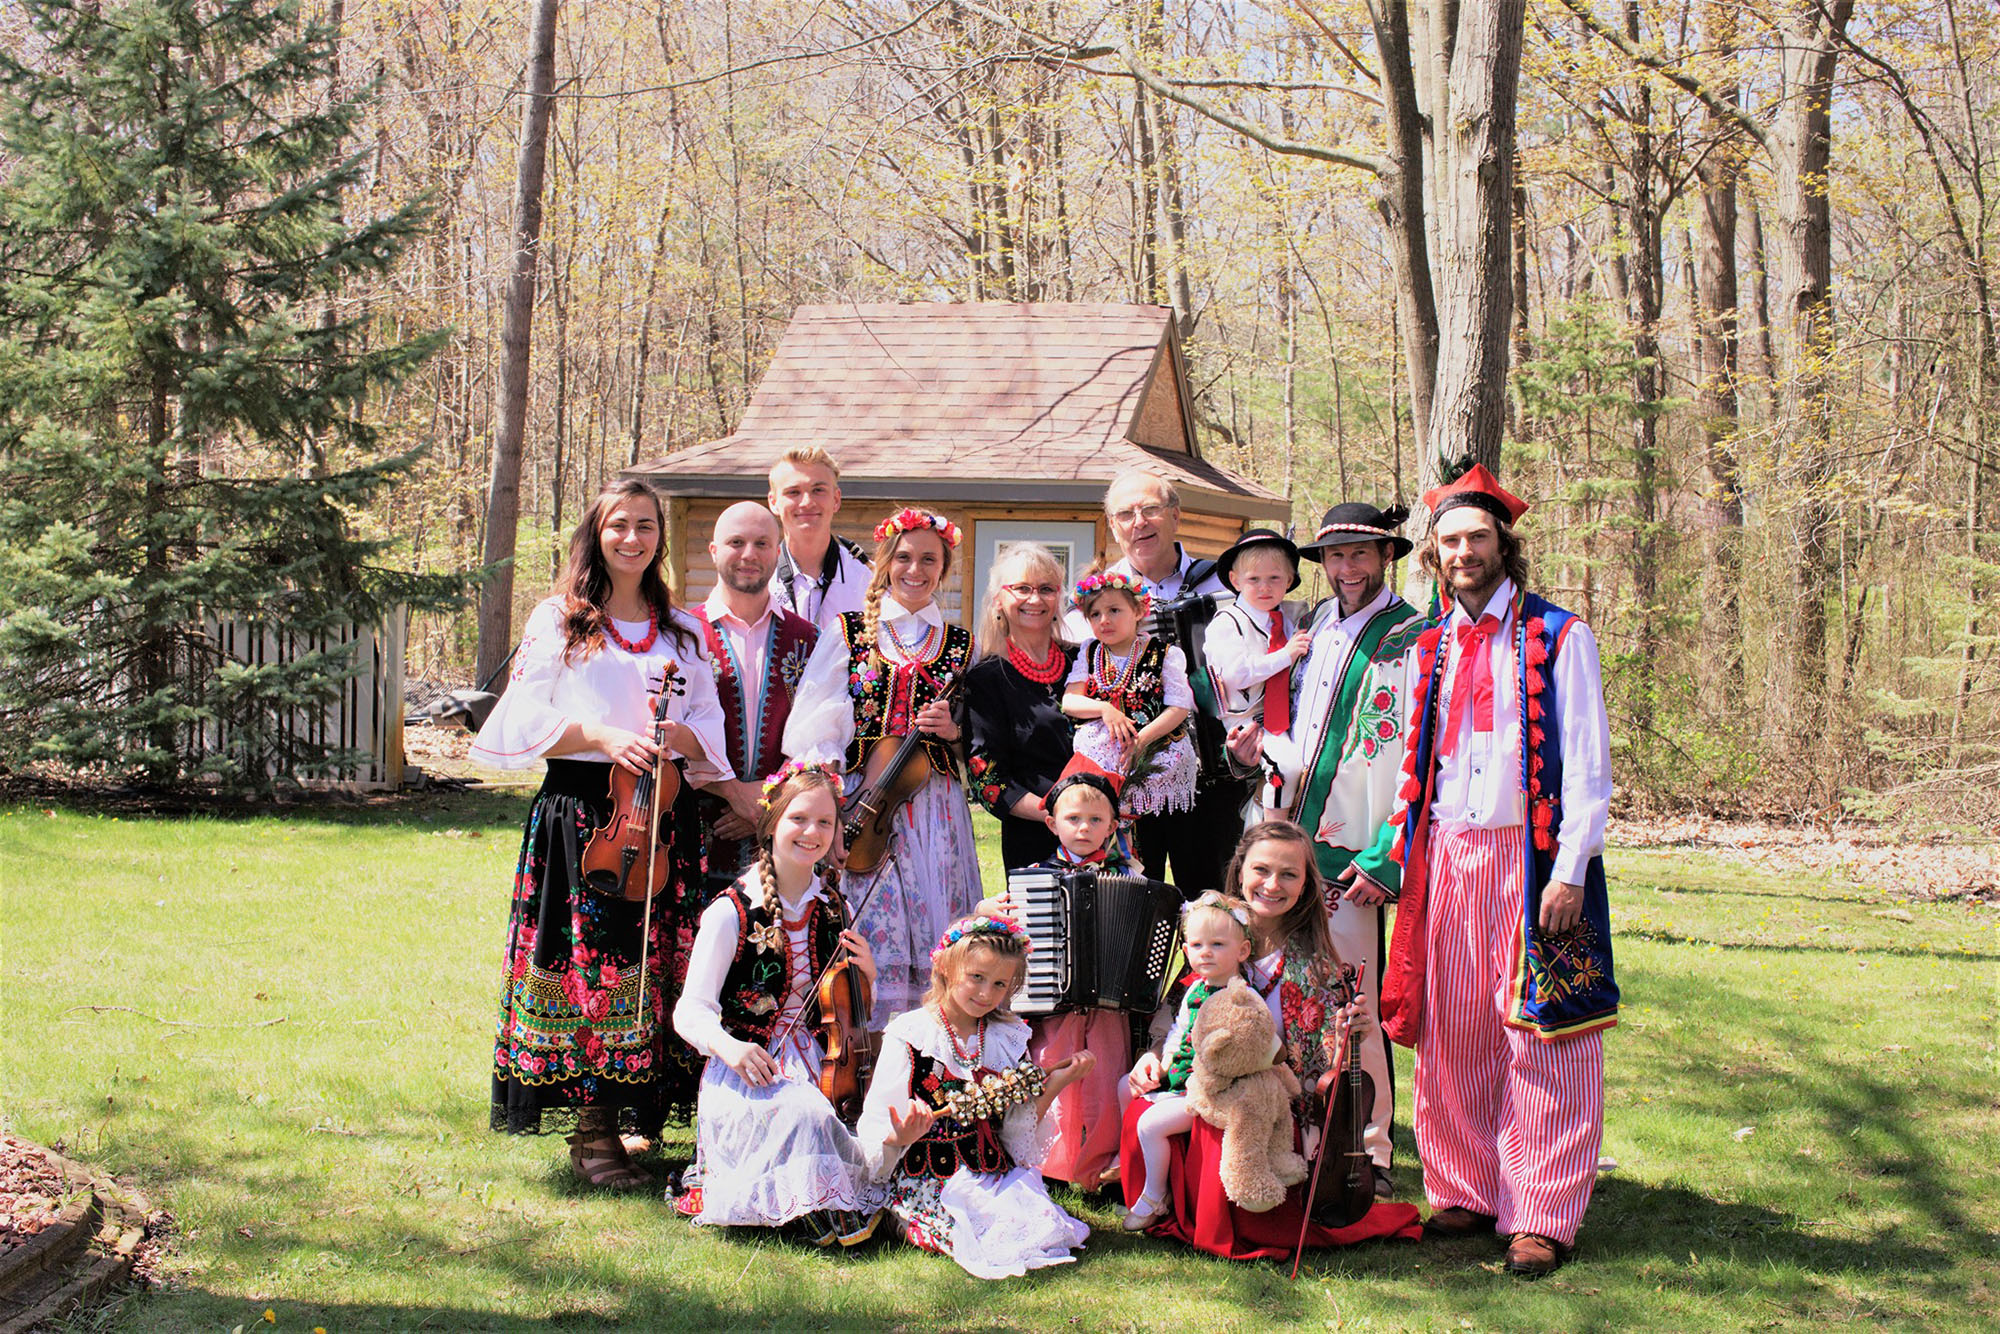 Pan Franek Polka Band members in traditional polka outfits with scenic woods in background